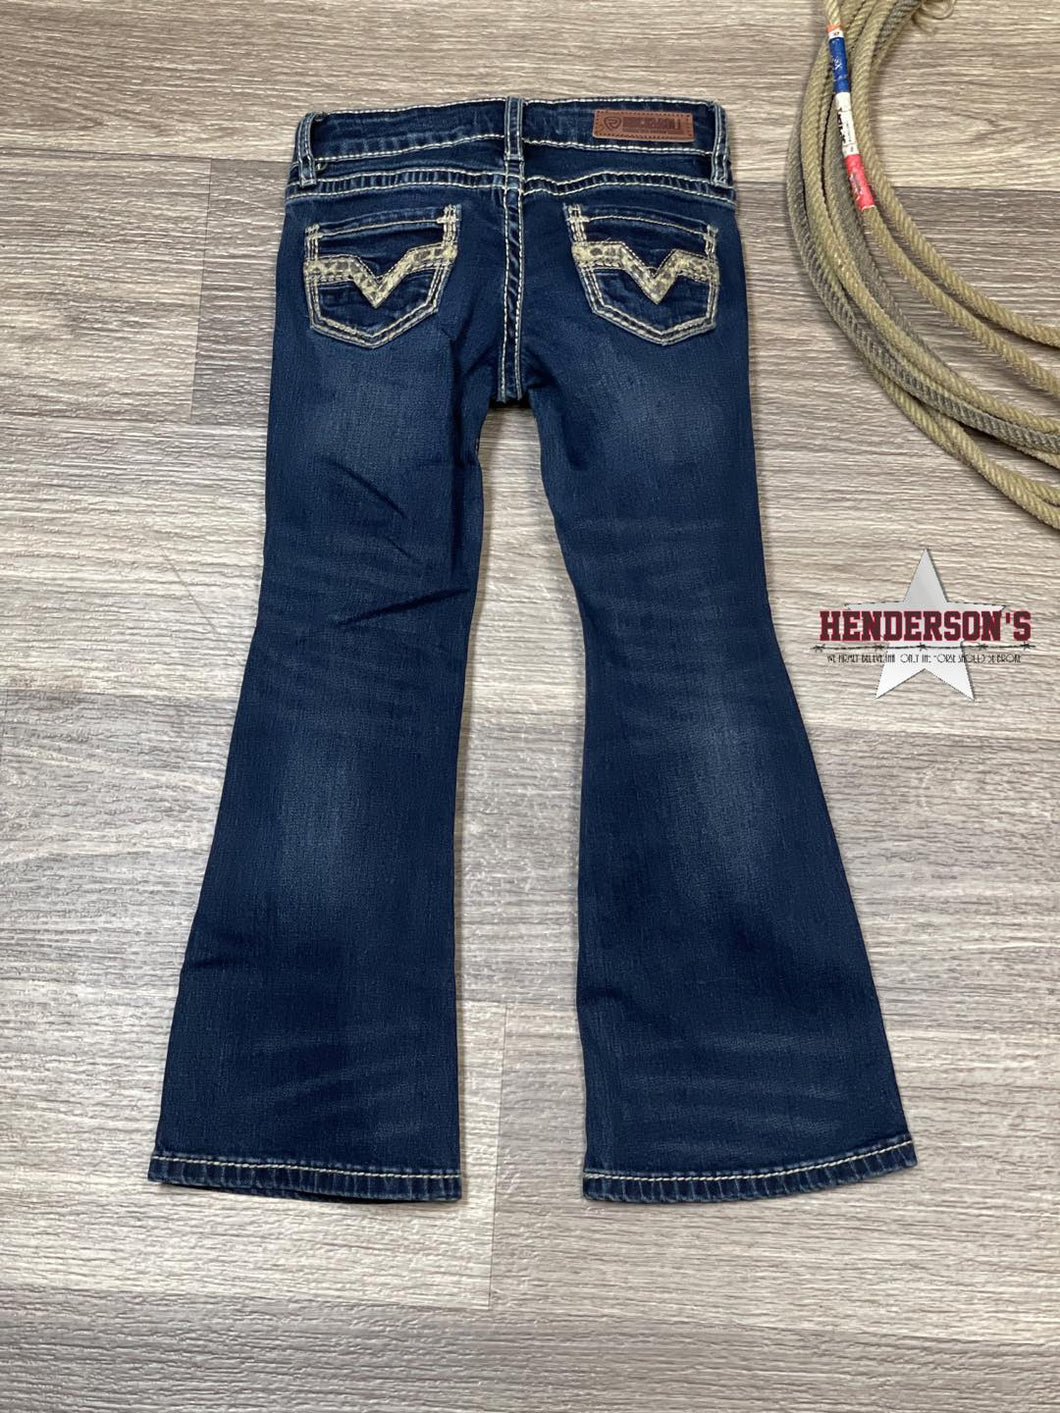 Cheetah Applique Embroidered Jeans - Henderson's Western Store